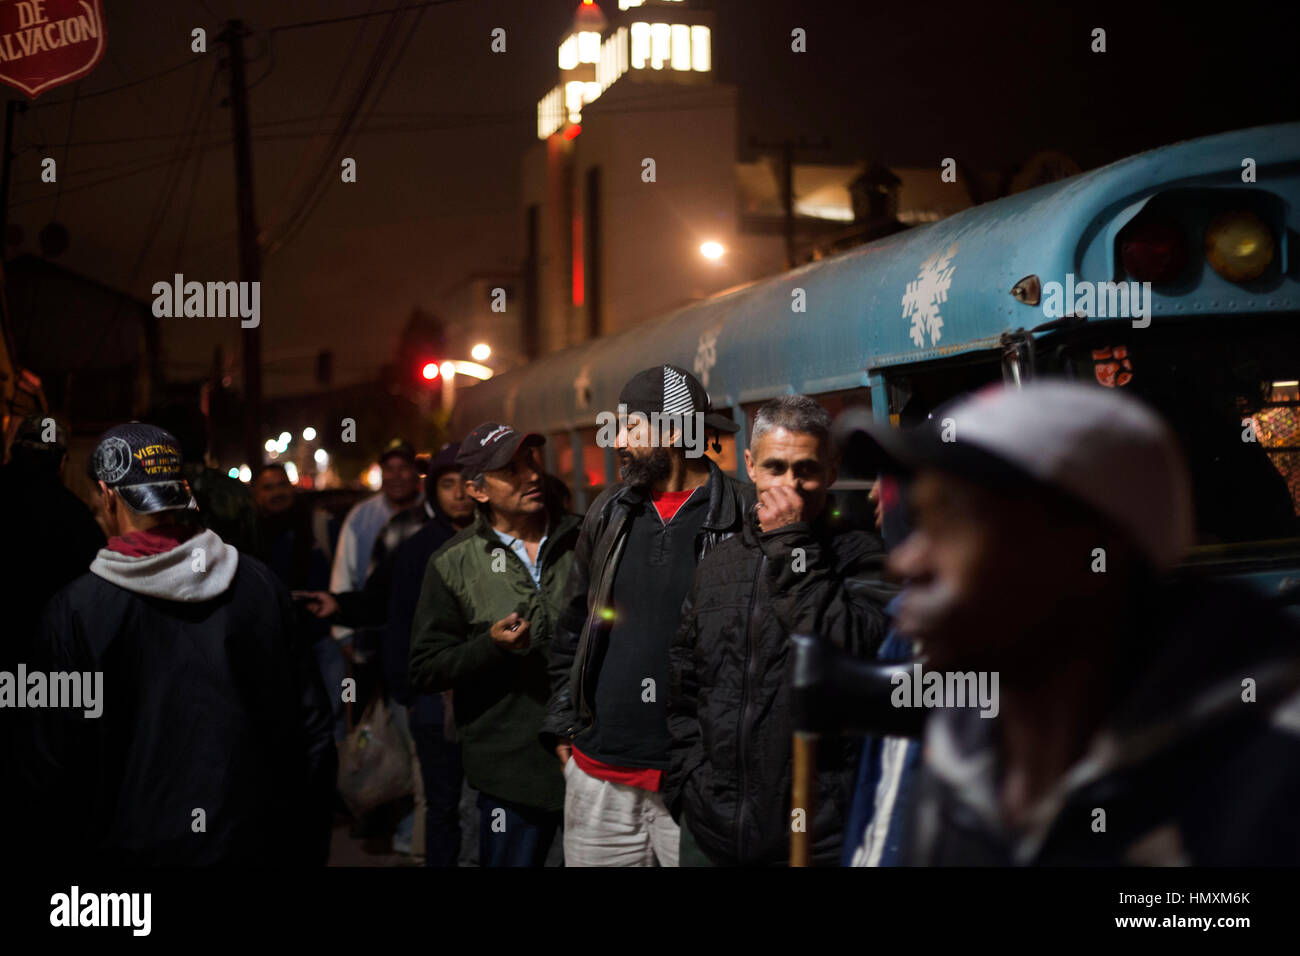 Tijuana, Mexico. 6th Feb, 2017. Migrants talk before they get into a shelter to rest, in Tijuana, Mexico, on Feb. 6, 2017. U.S. President Donald Trump signed two executive orders on Jan. 25 to have the Department of Homeland Security begin planning, designing and building a 'physical barrier' along the U.S.-Mexico border, identify undocumented immigrants, and remove those who have criminal records. Credit: David de la Paz/Xinhua/Alamy Live News Stock Photo